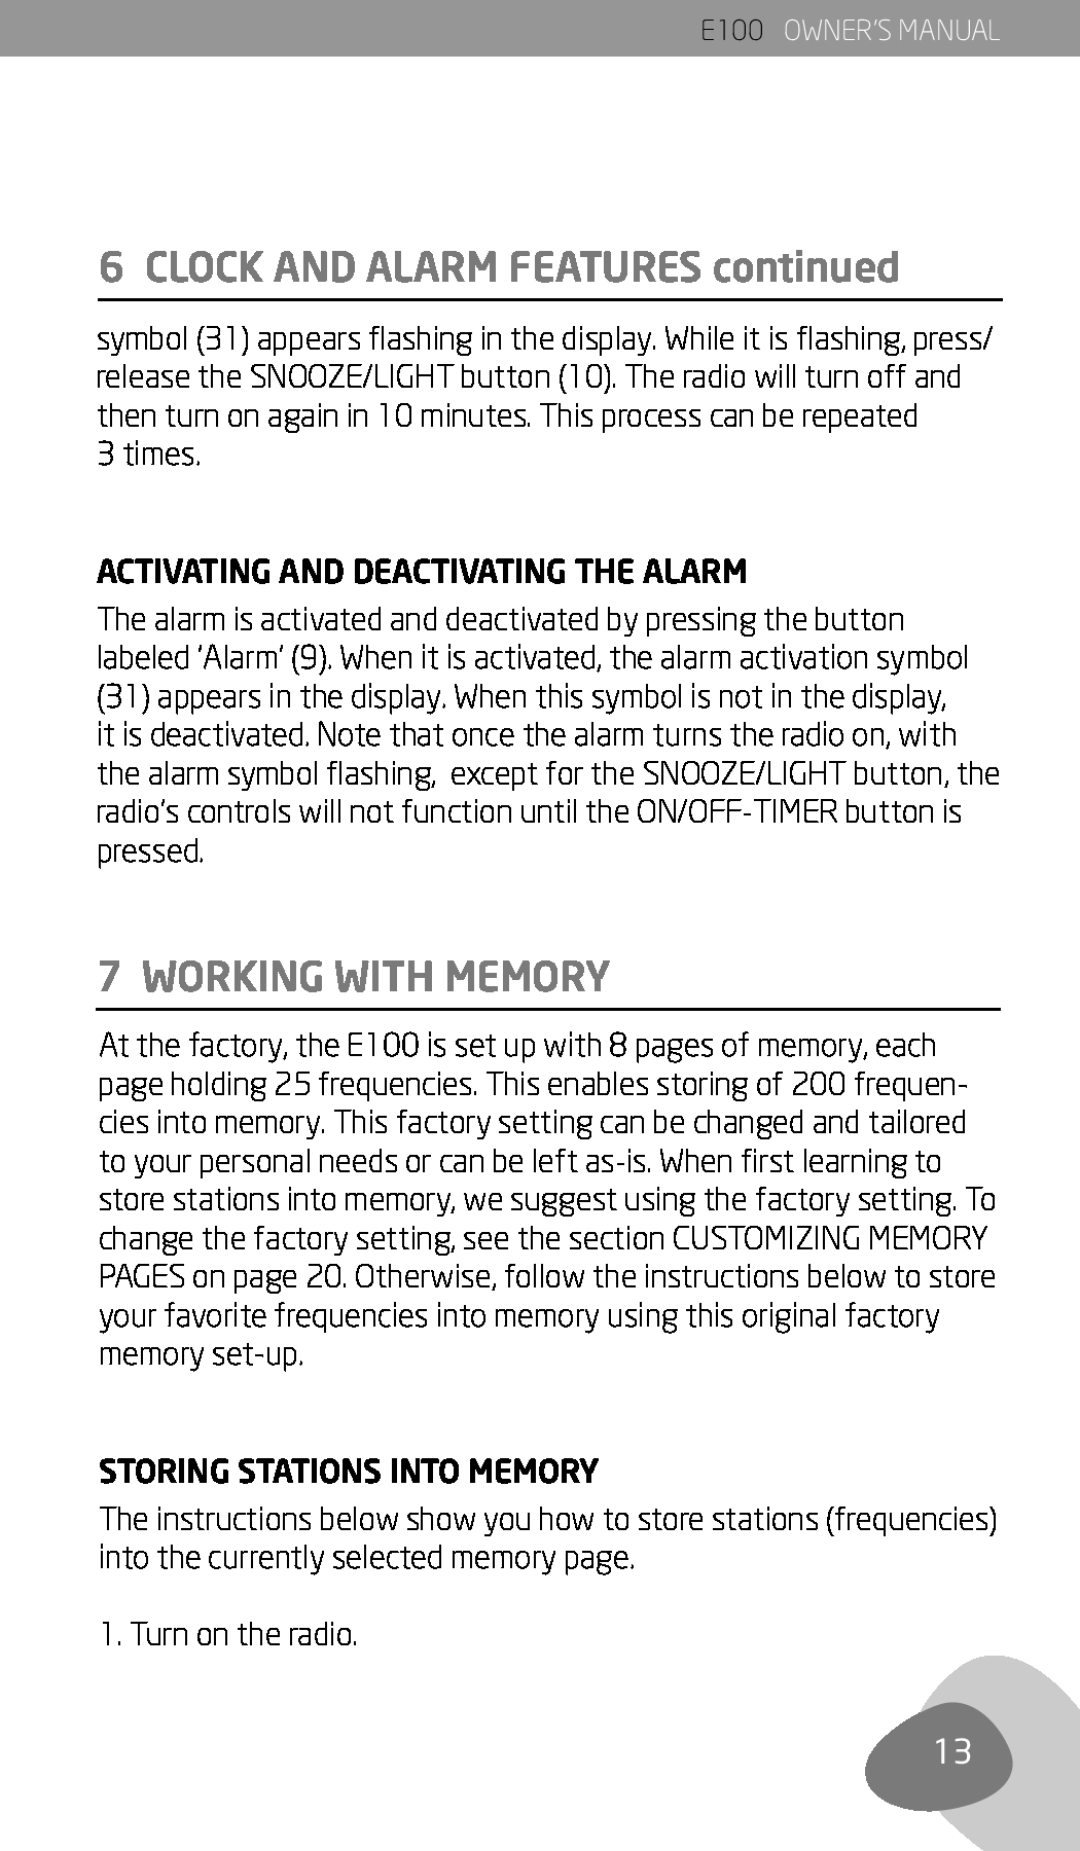 Eton E100 owner manual Working With Memory, CLOCK AND ALARM FEATURES continued 